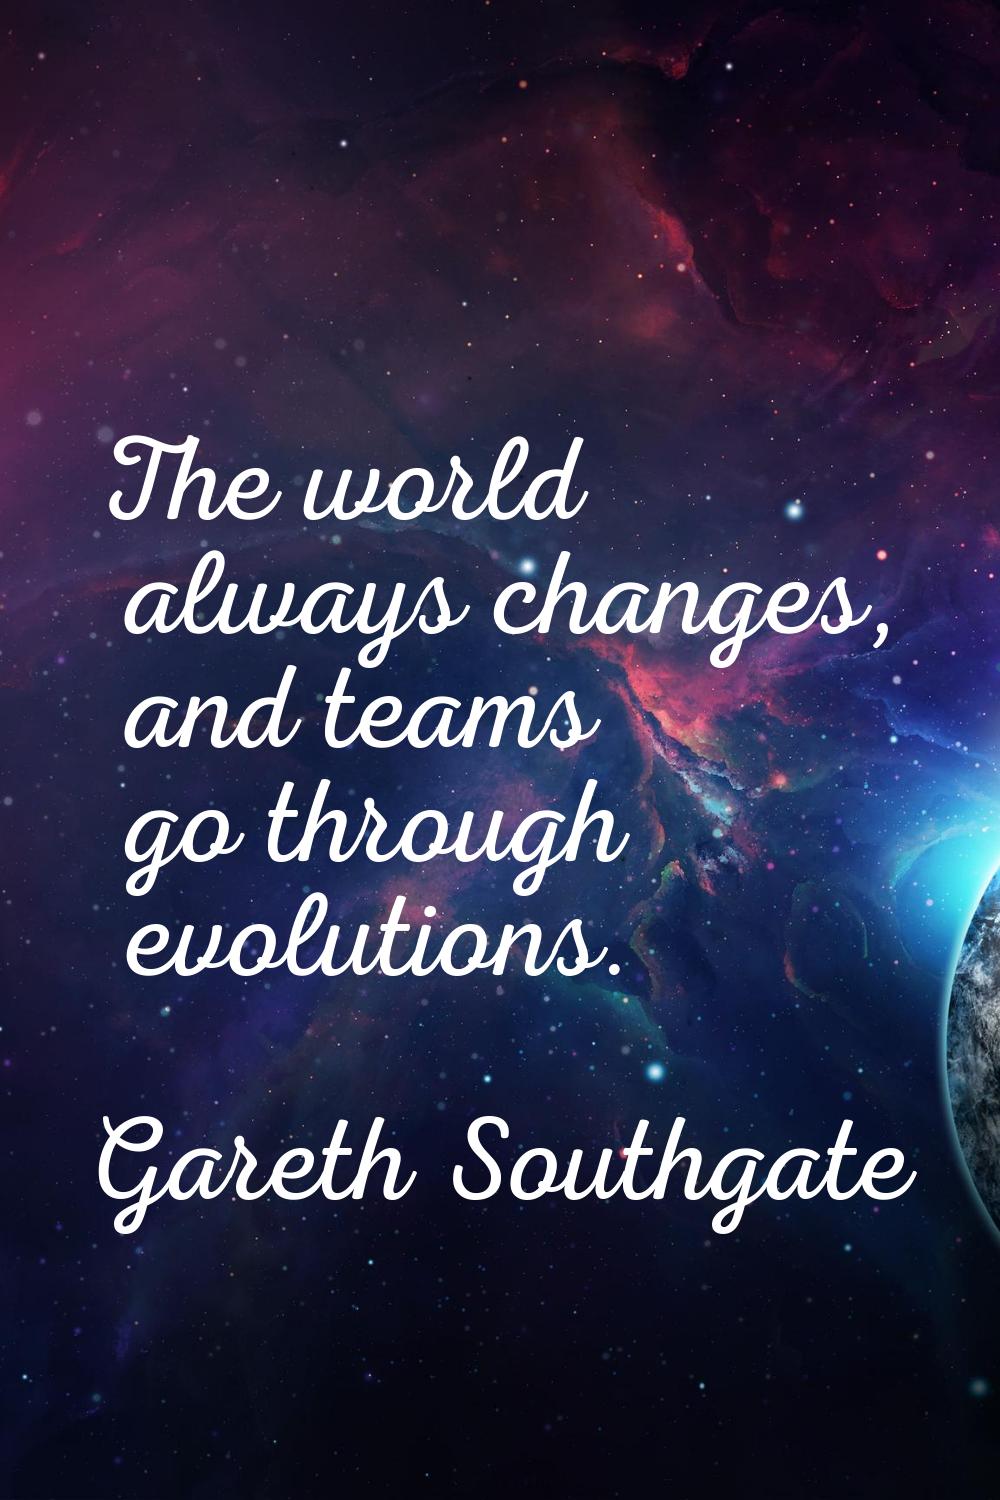 The world always changes, and teams go through evolutions.